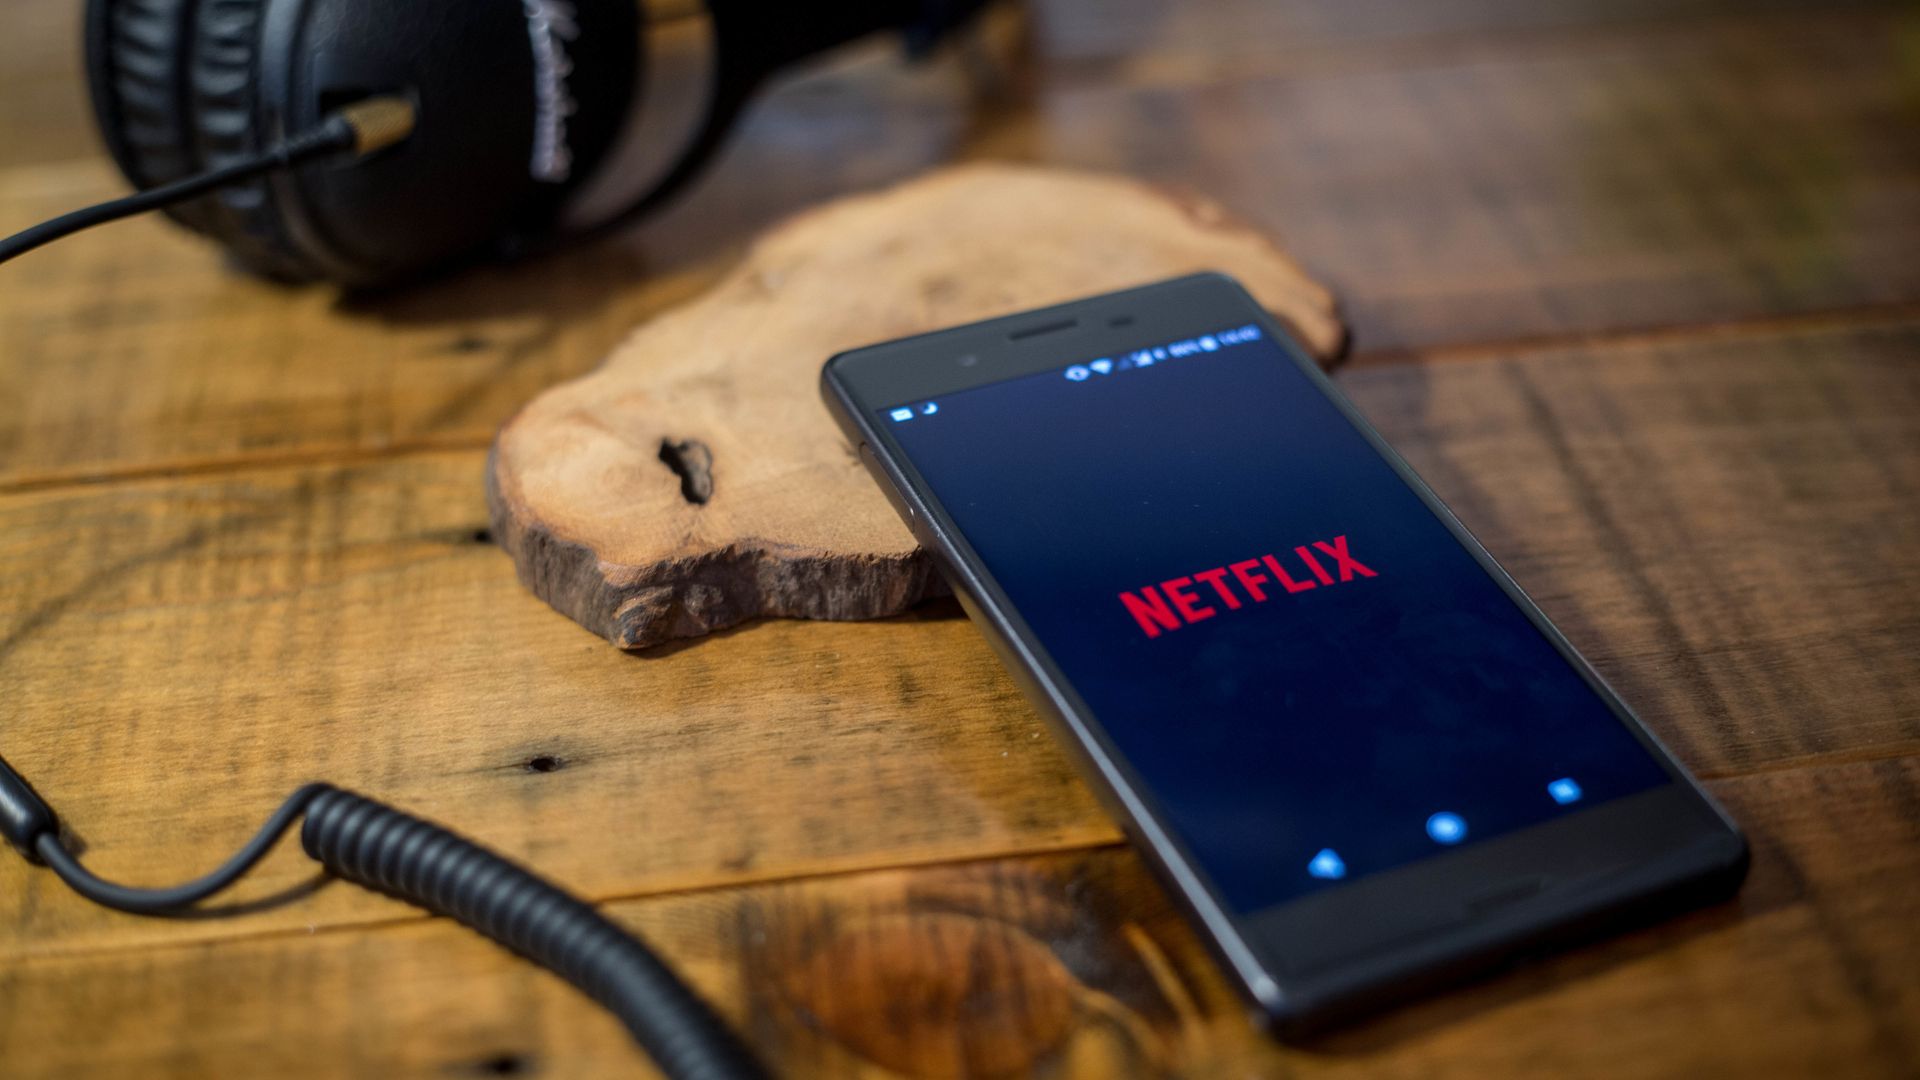 The netflix logo is displayed on a mobile phone with headphones plugged in 